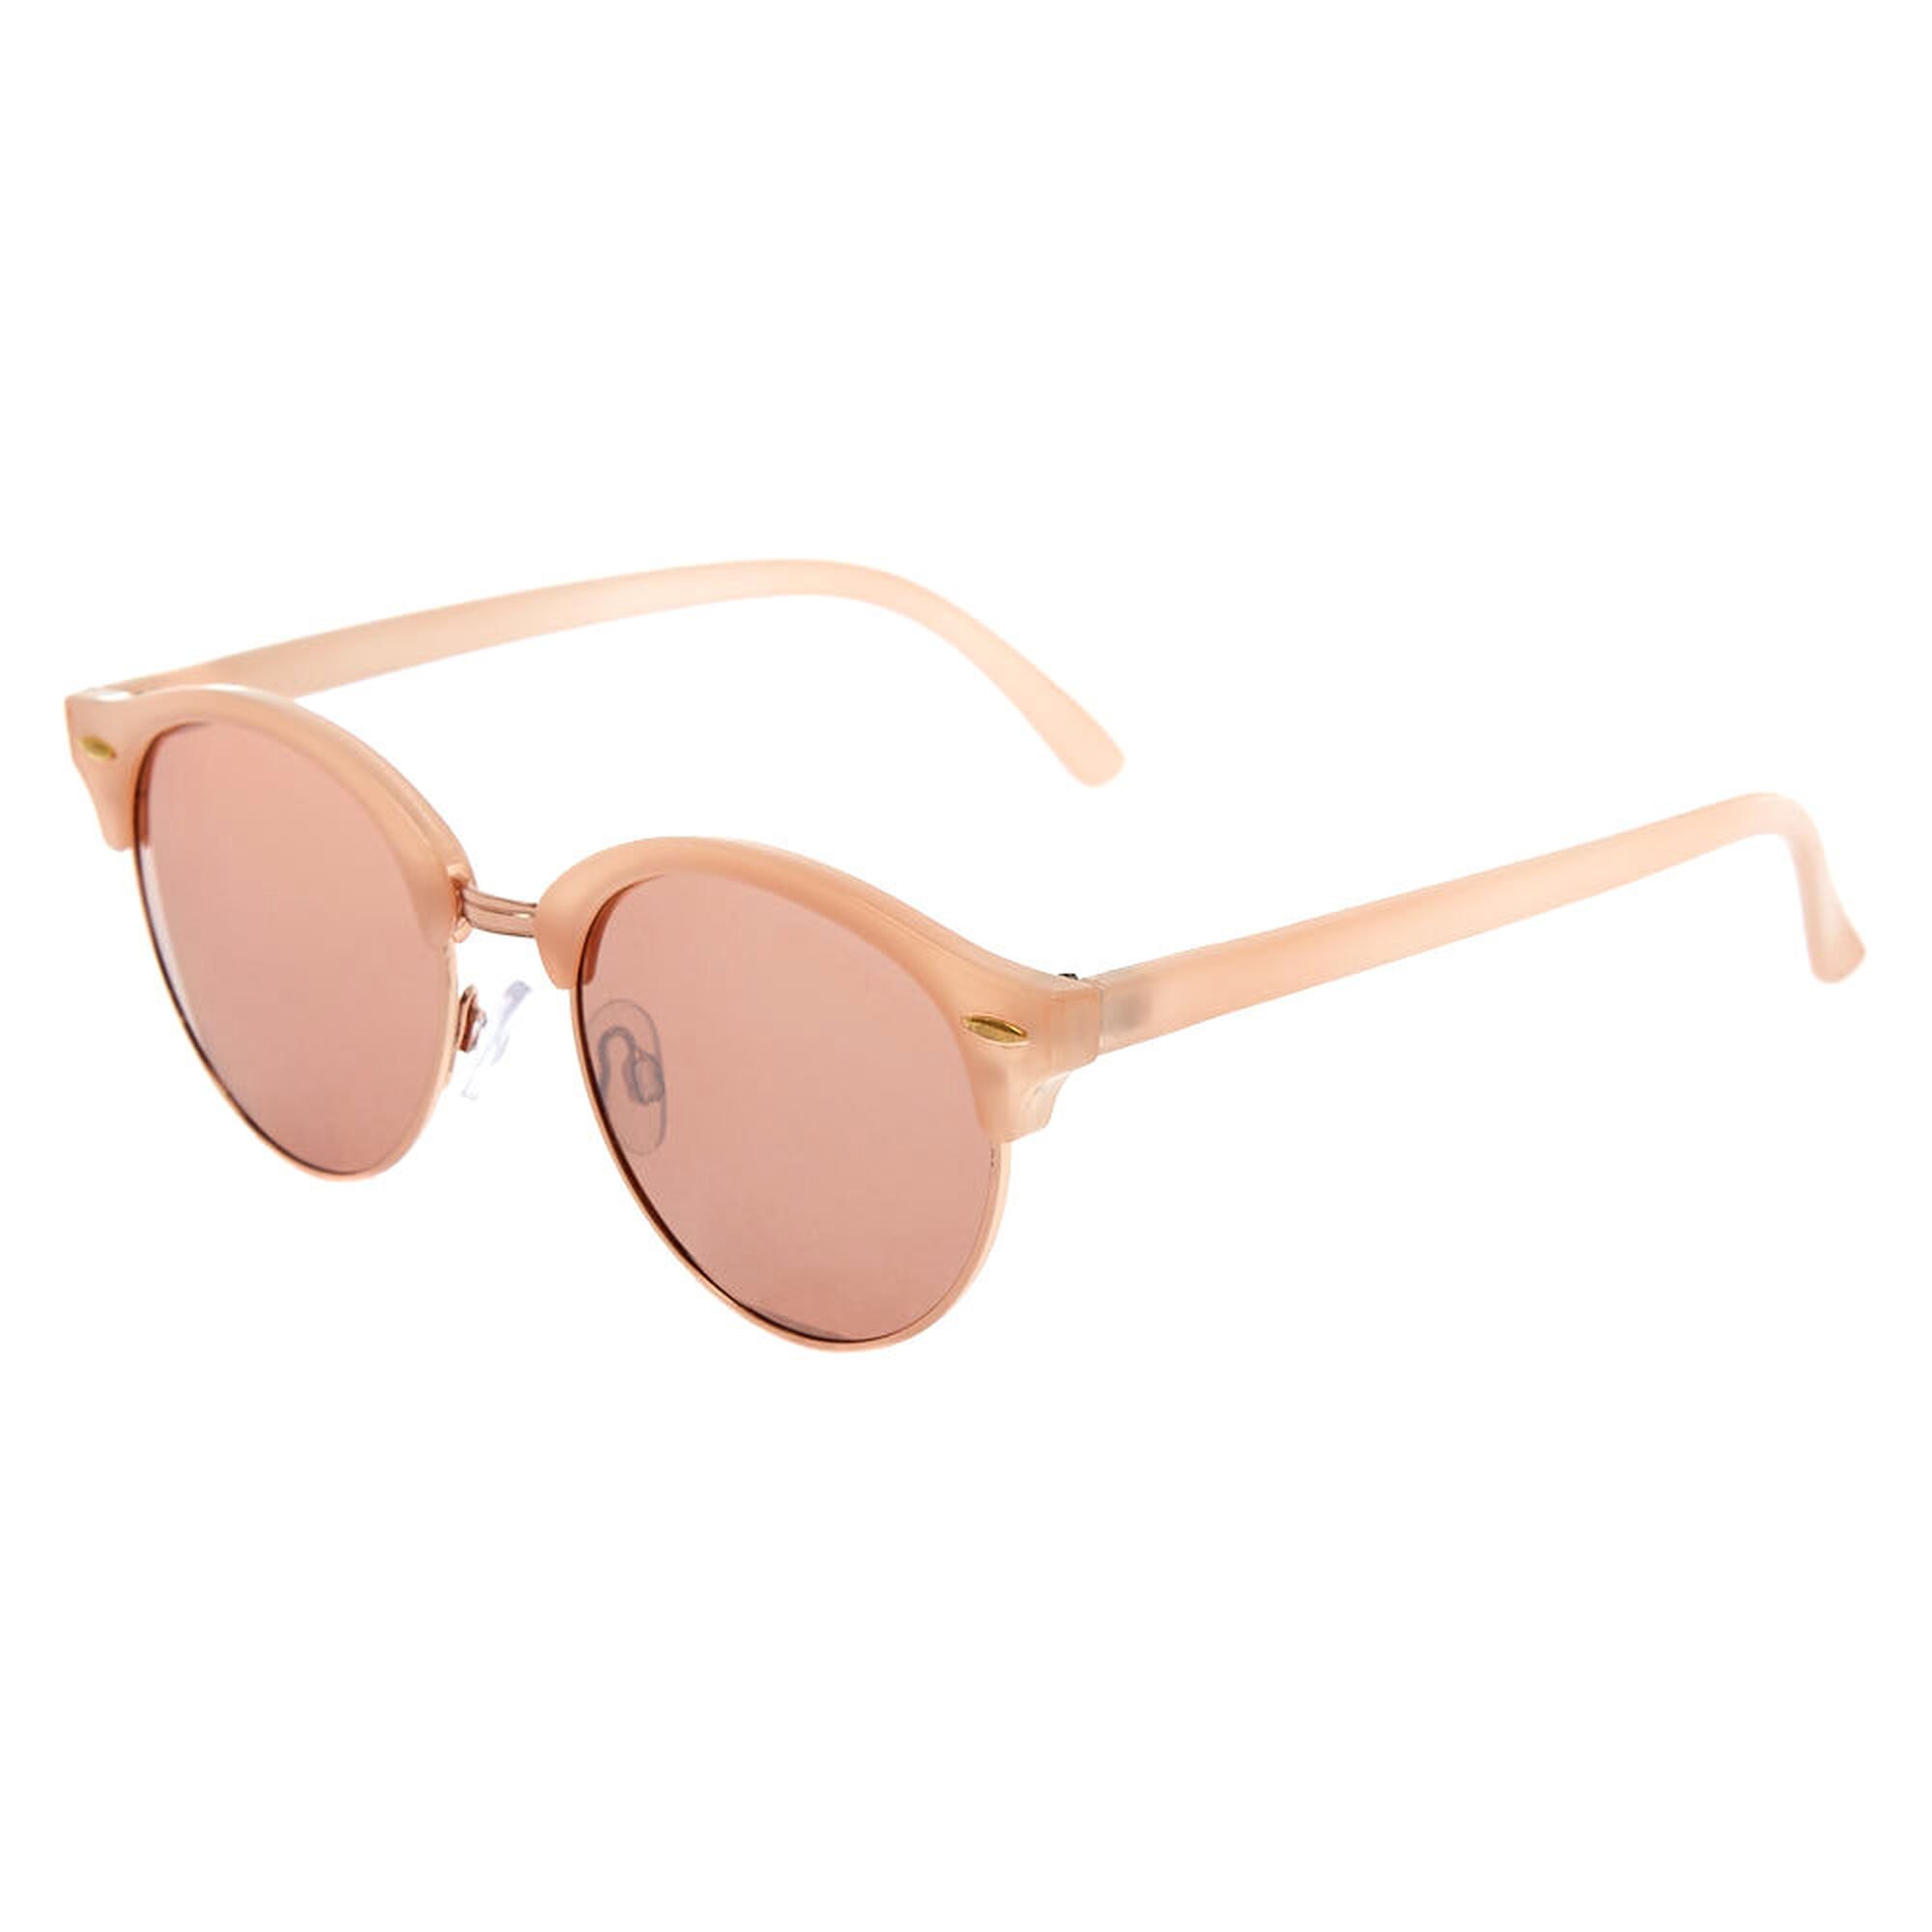 View Claires Rose Tinted Mod Sunglasses Blush Gold information